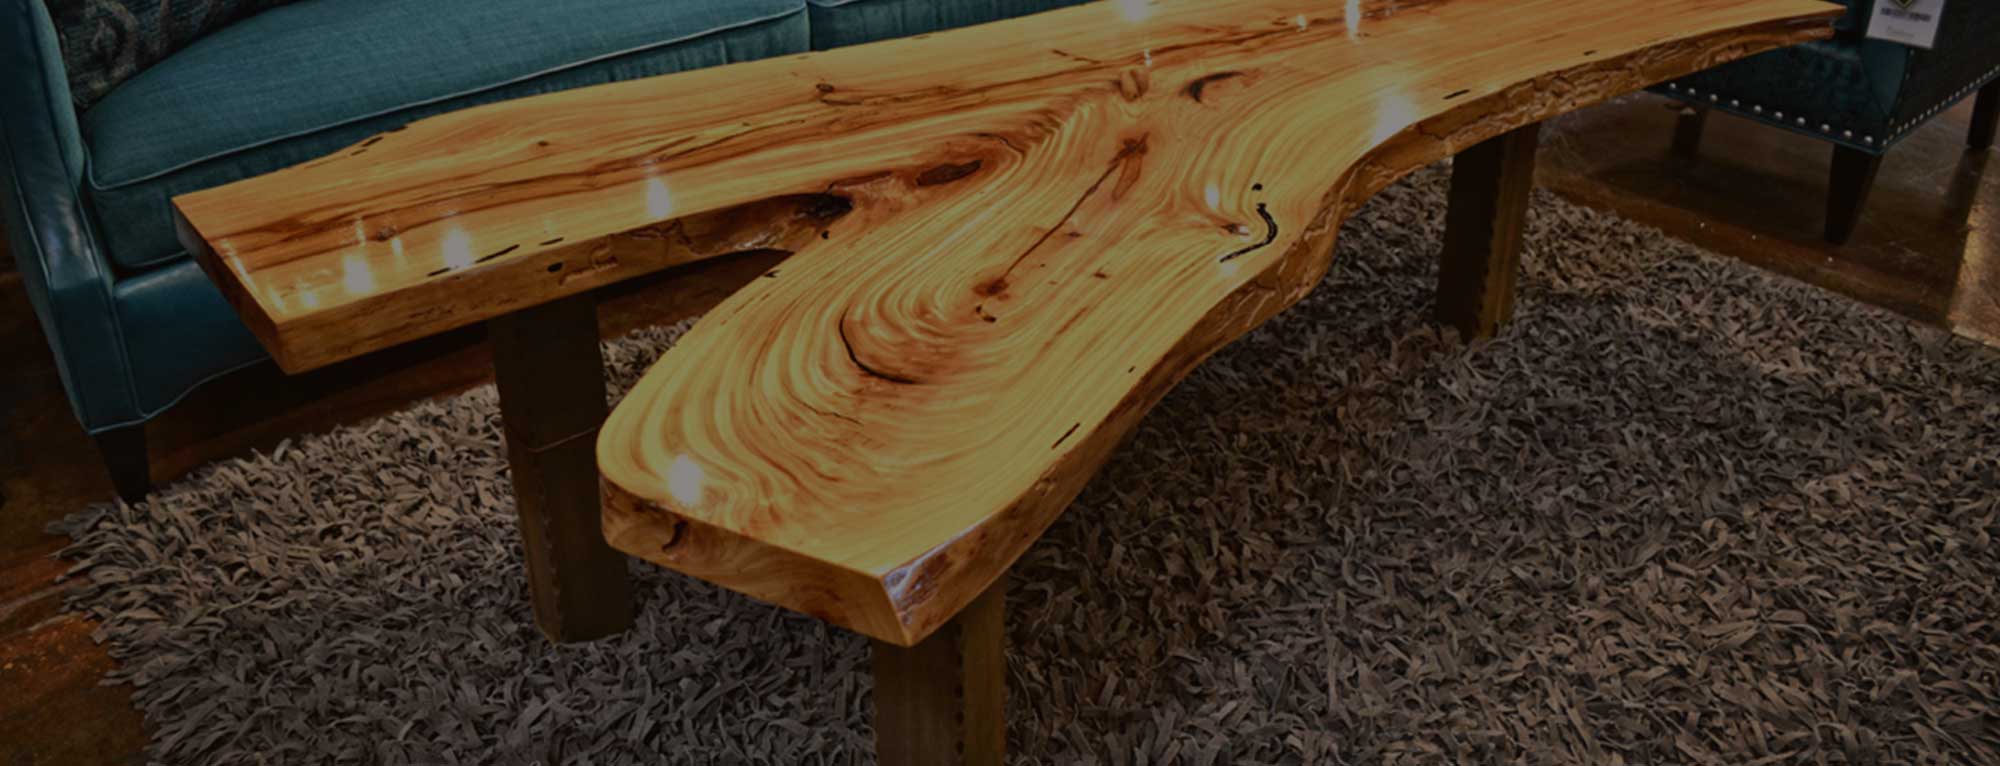 Furniture, highlighting a wooden table.